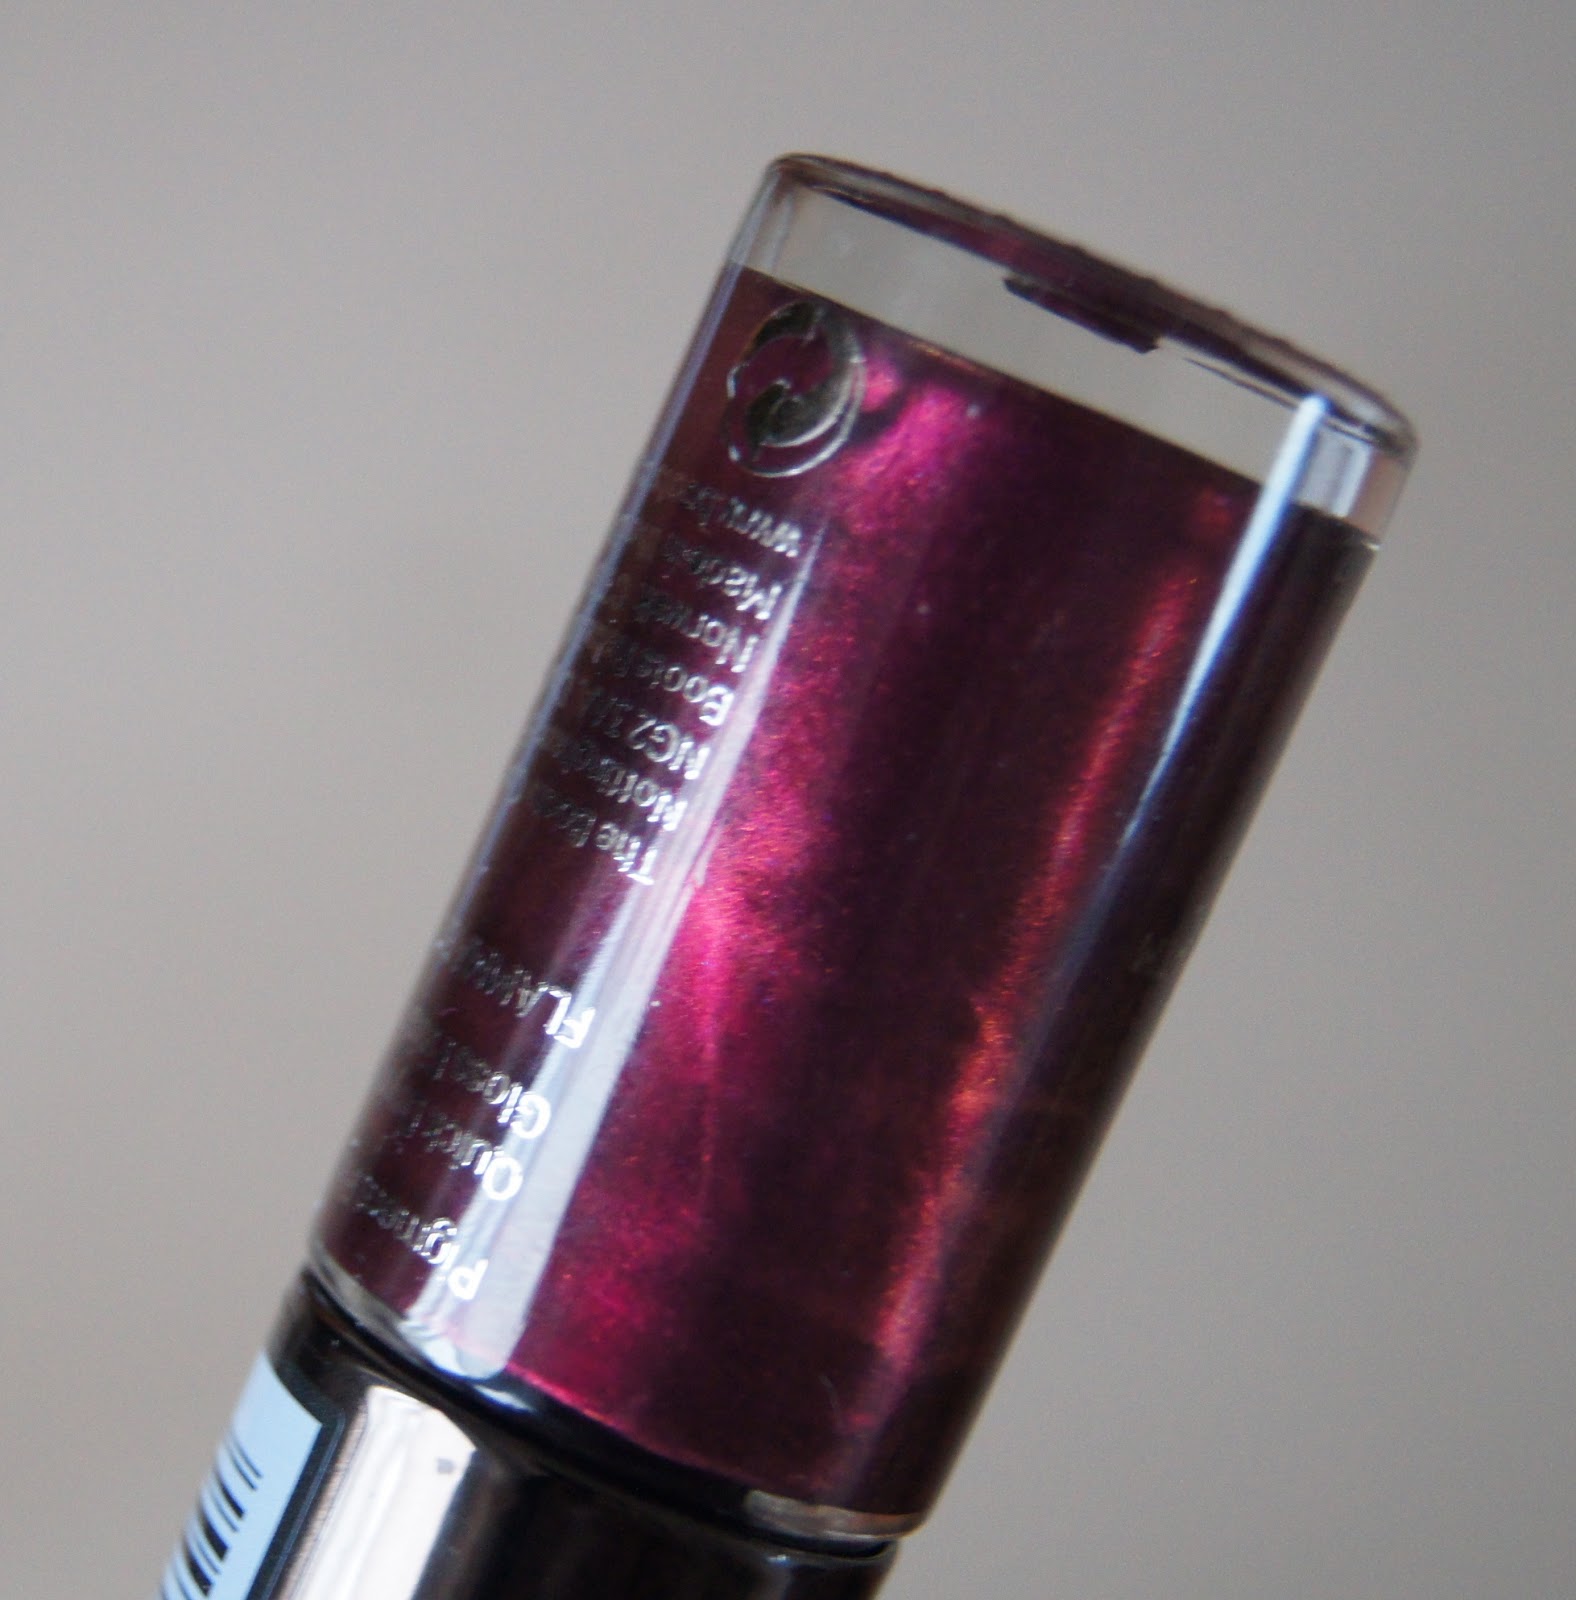 AliceGraceBeauty / UK Beauty Blog: No7 Stay Perfect Damson Dream Nail Colour  Review + Swatch